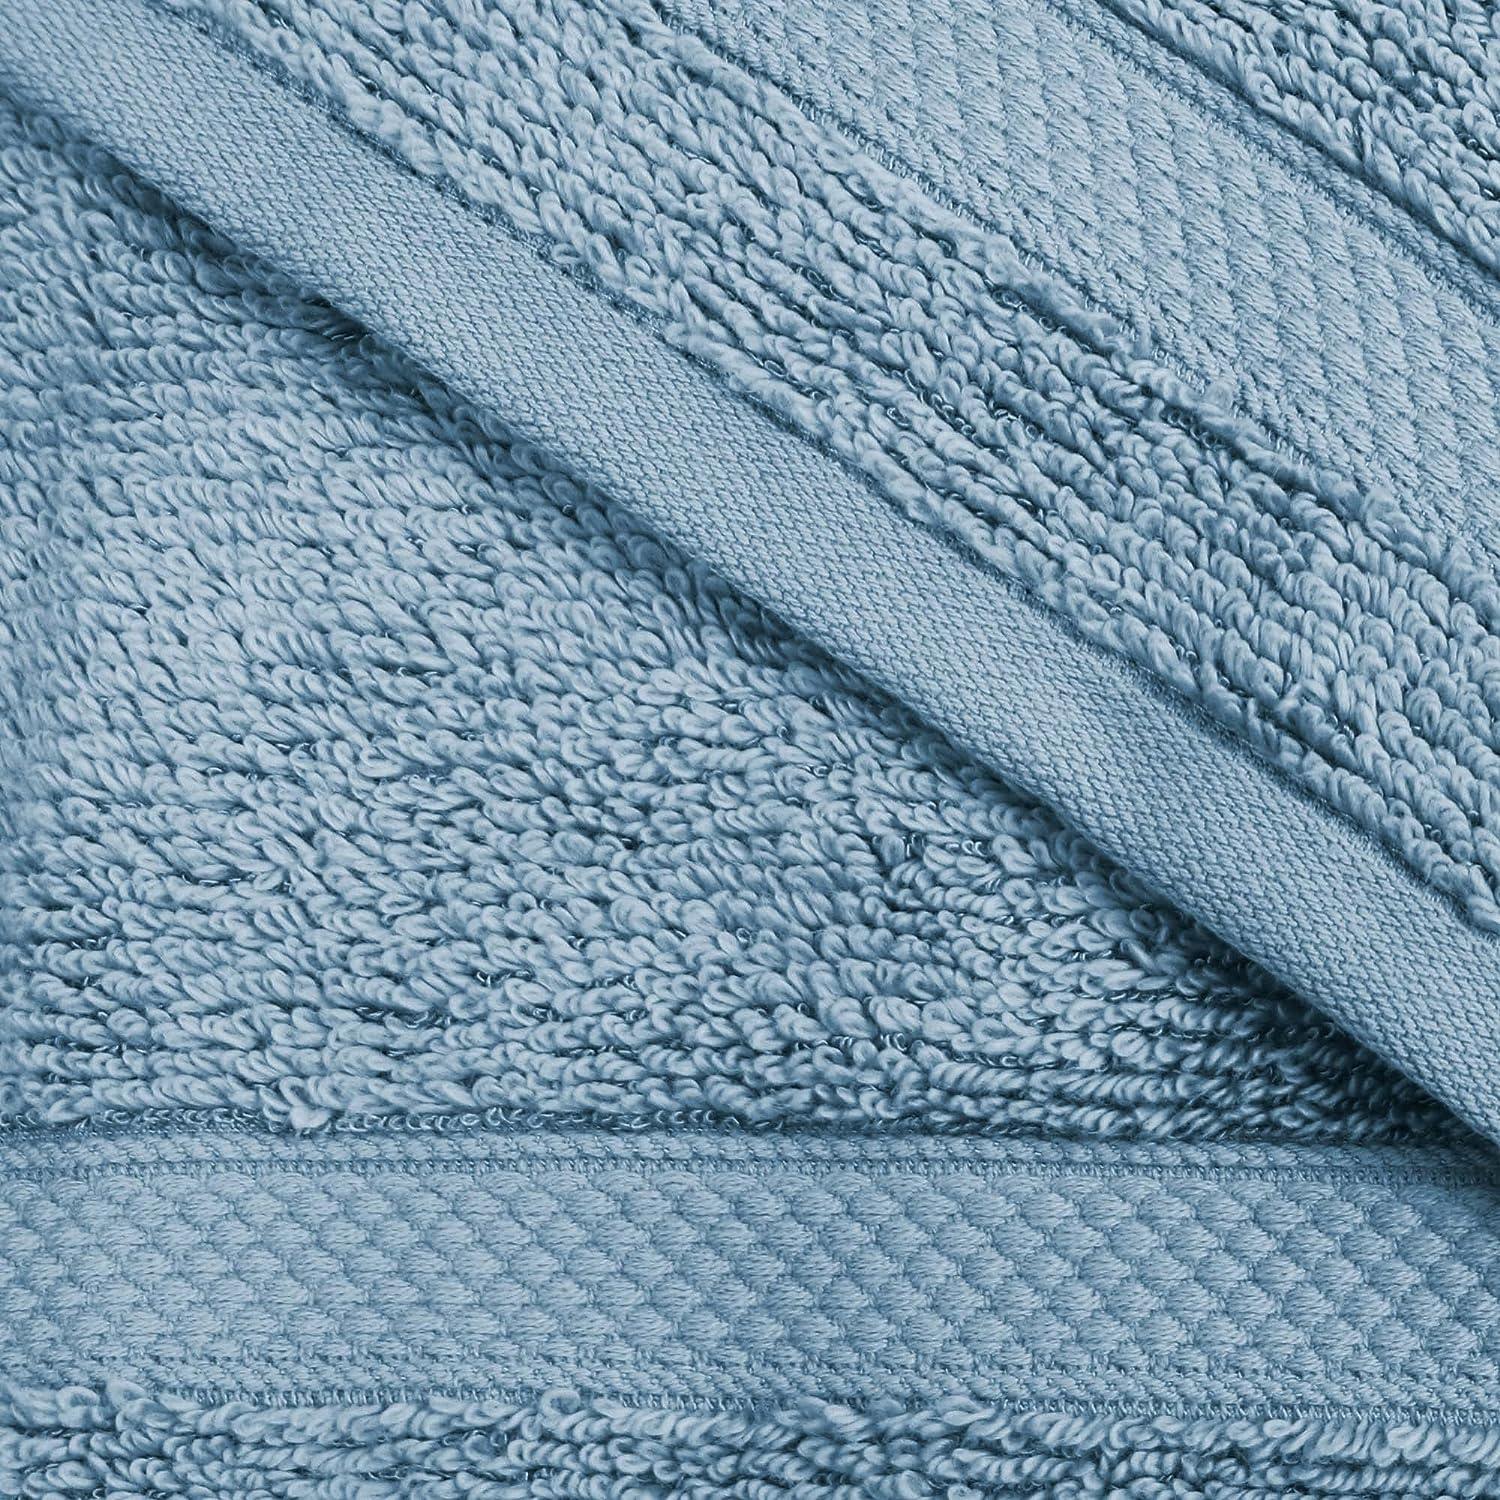 Reviews for StyleWell 6-Piece HygroCotton Bath Towel Set in Washed Denim |  Pg 4 - The Home Depot